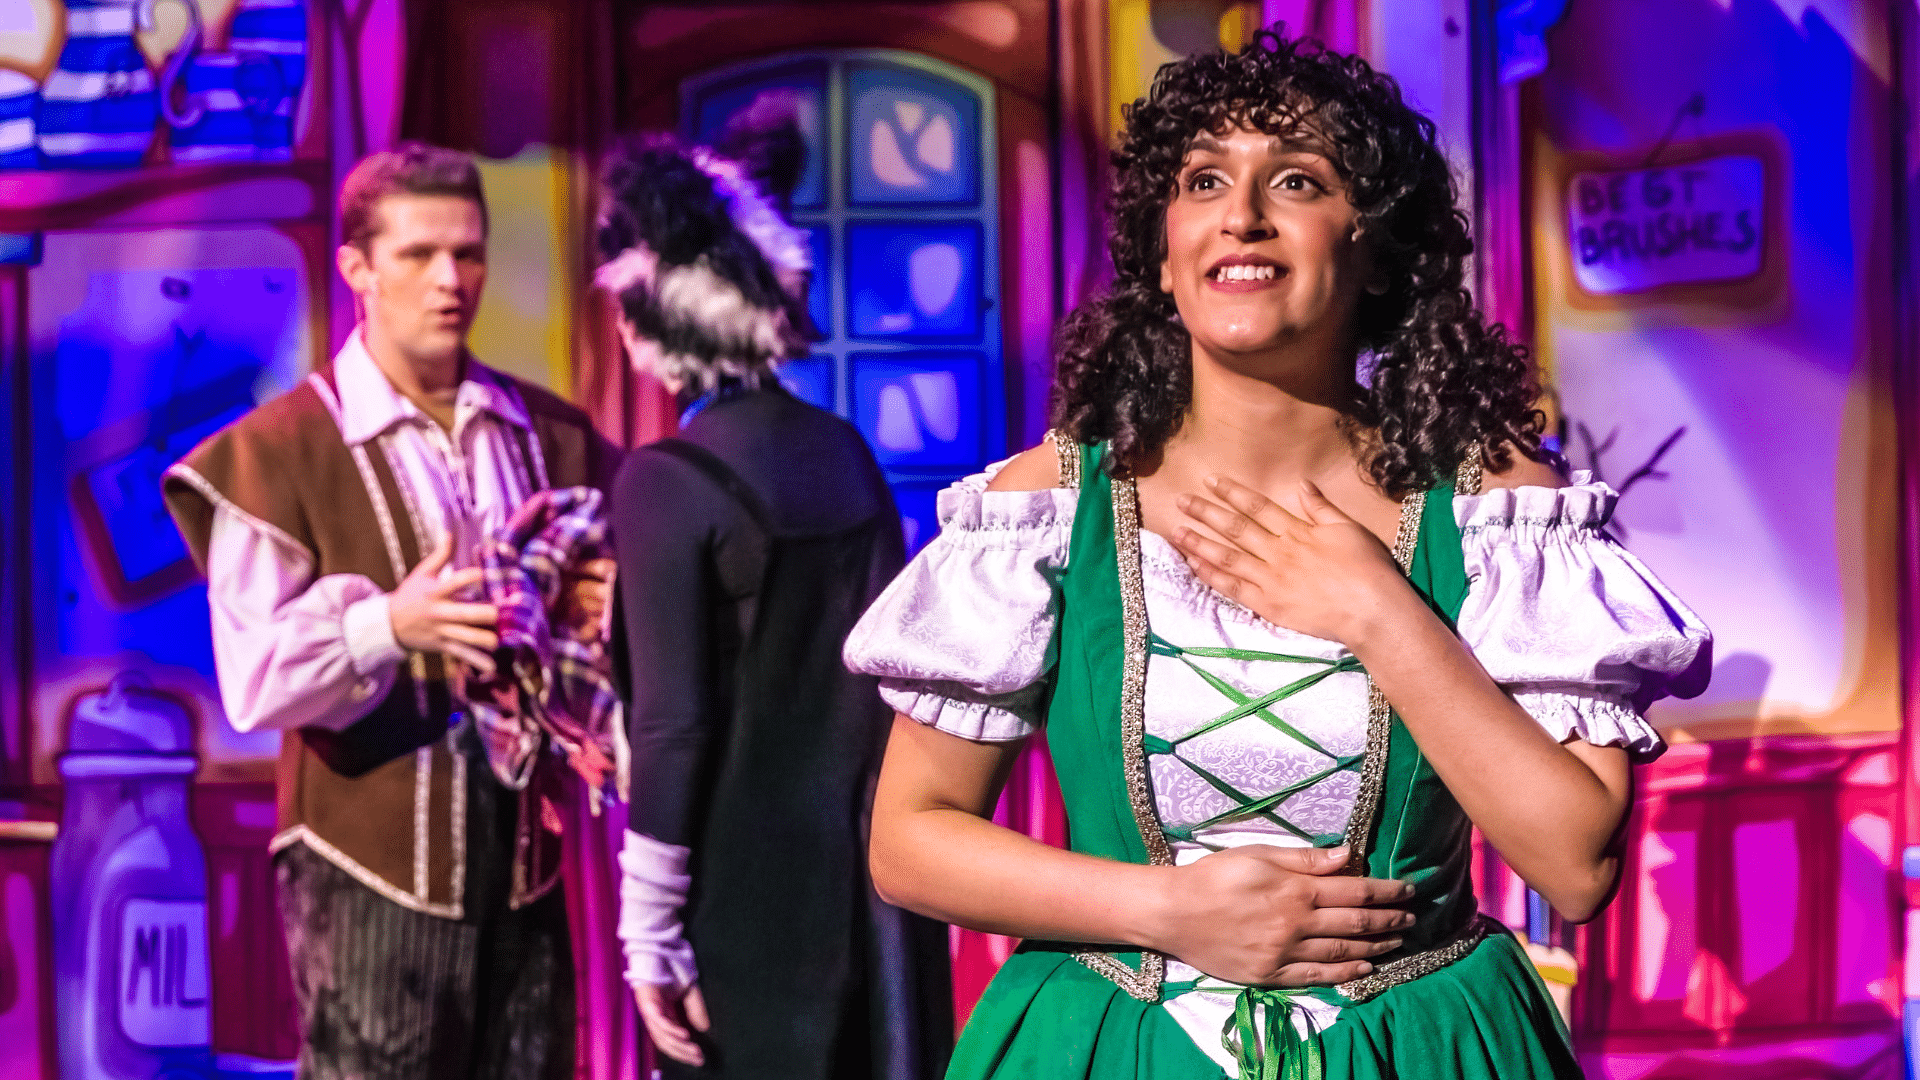 Dick Whittington Production Photo: Sophia Lewis stands in the foreground, wearing a green pinafore dress over a white off-the-shoulder blouse; her hands are resting against her collar bone and abdomen; in the background, Dick (Elliot Coombe) and Sox (Poppy Joy) are in conversation in a colourful shop-interior.